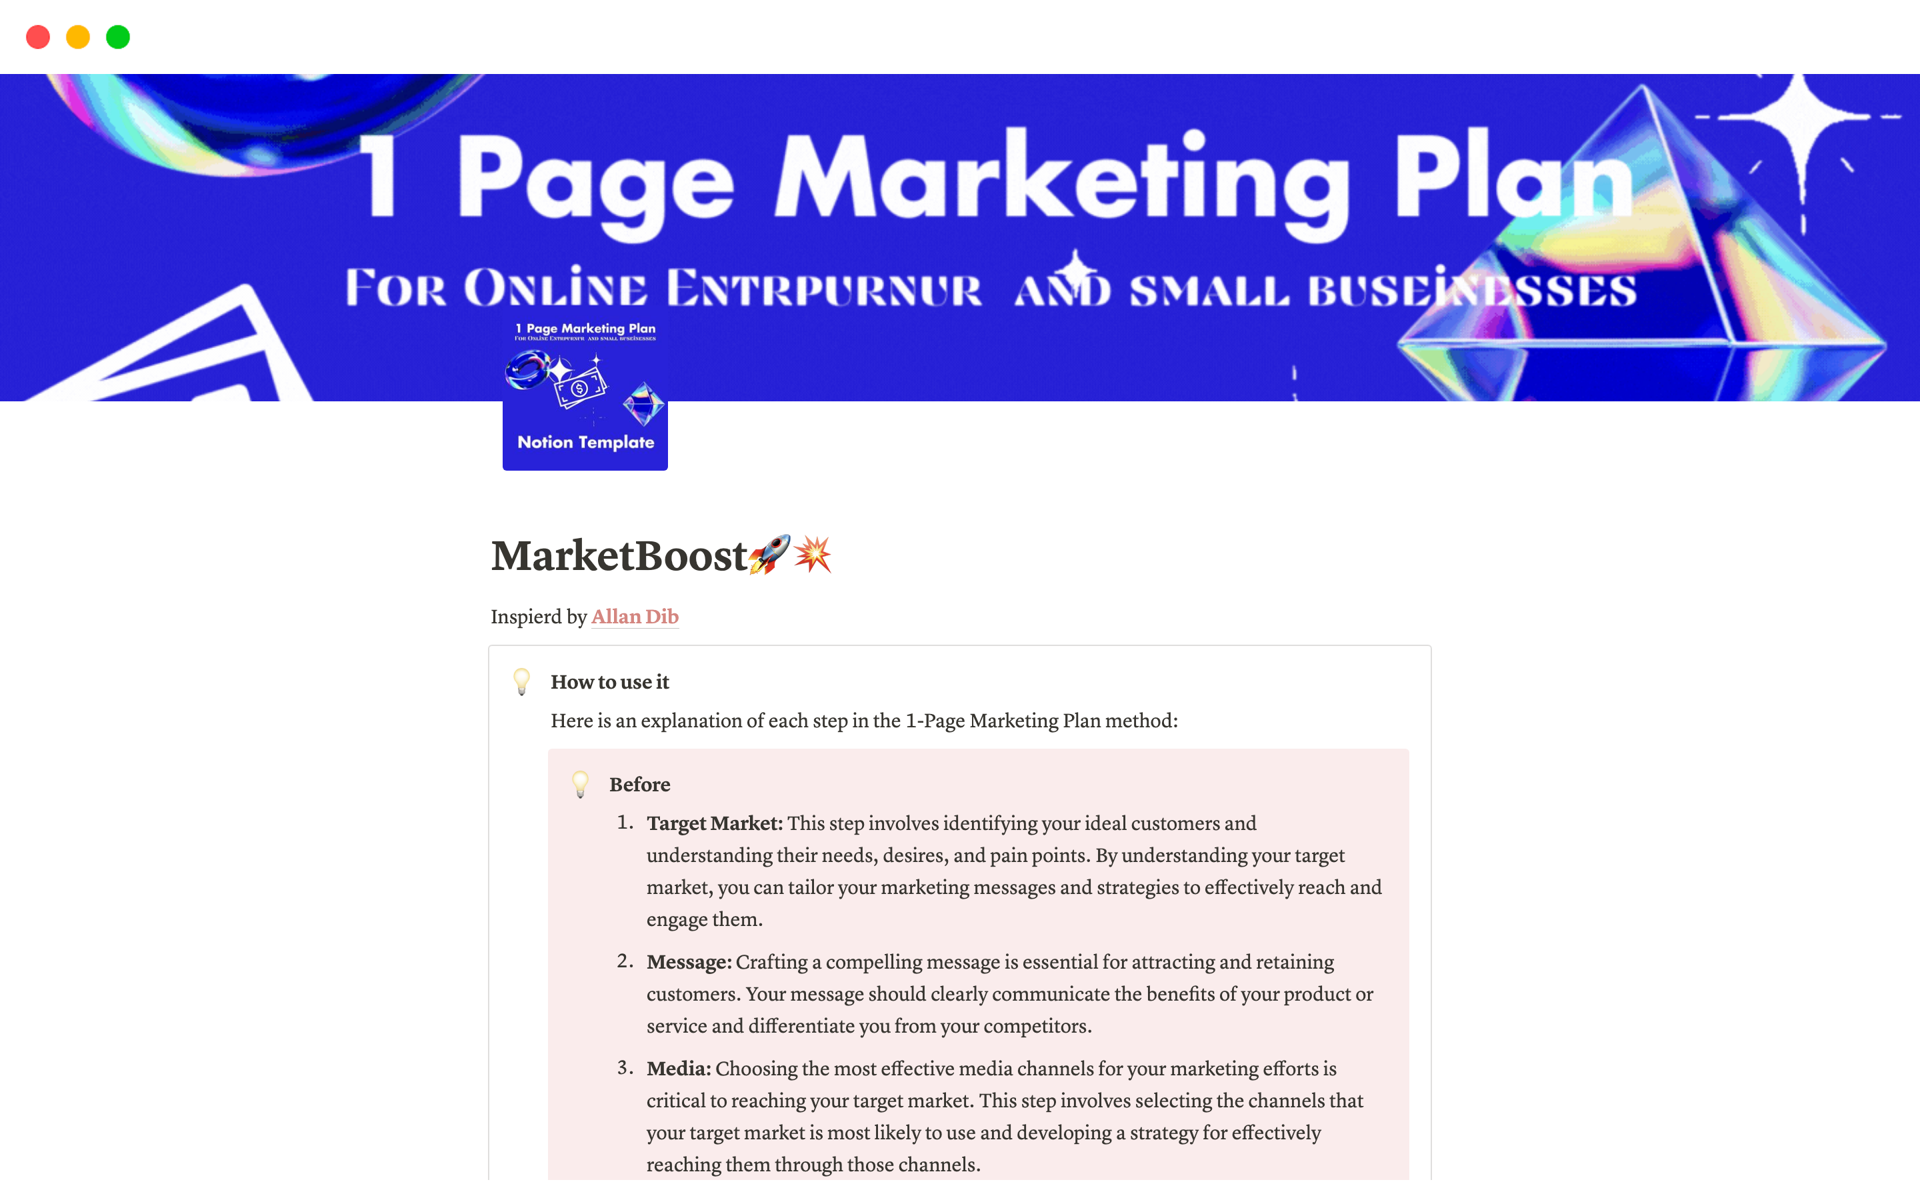 MarketBoost🚀💥: The Ultimate 1-Page Marketing Plan Notion Template for Small Online Businesses